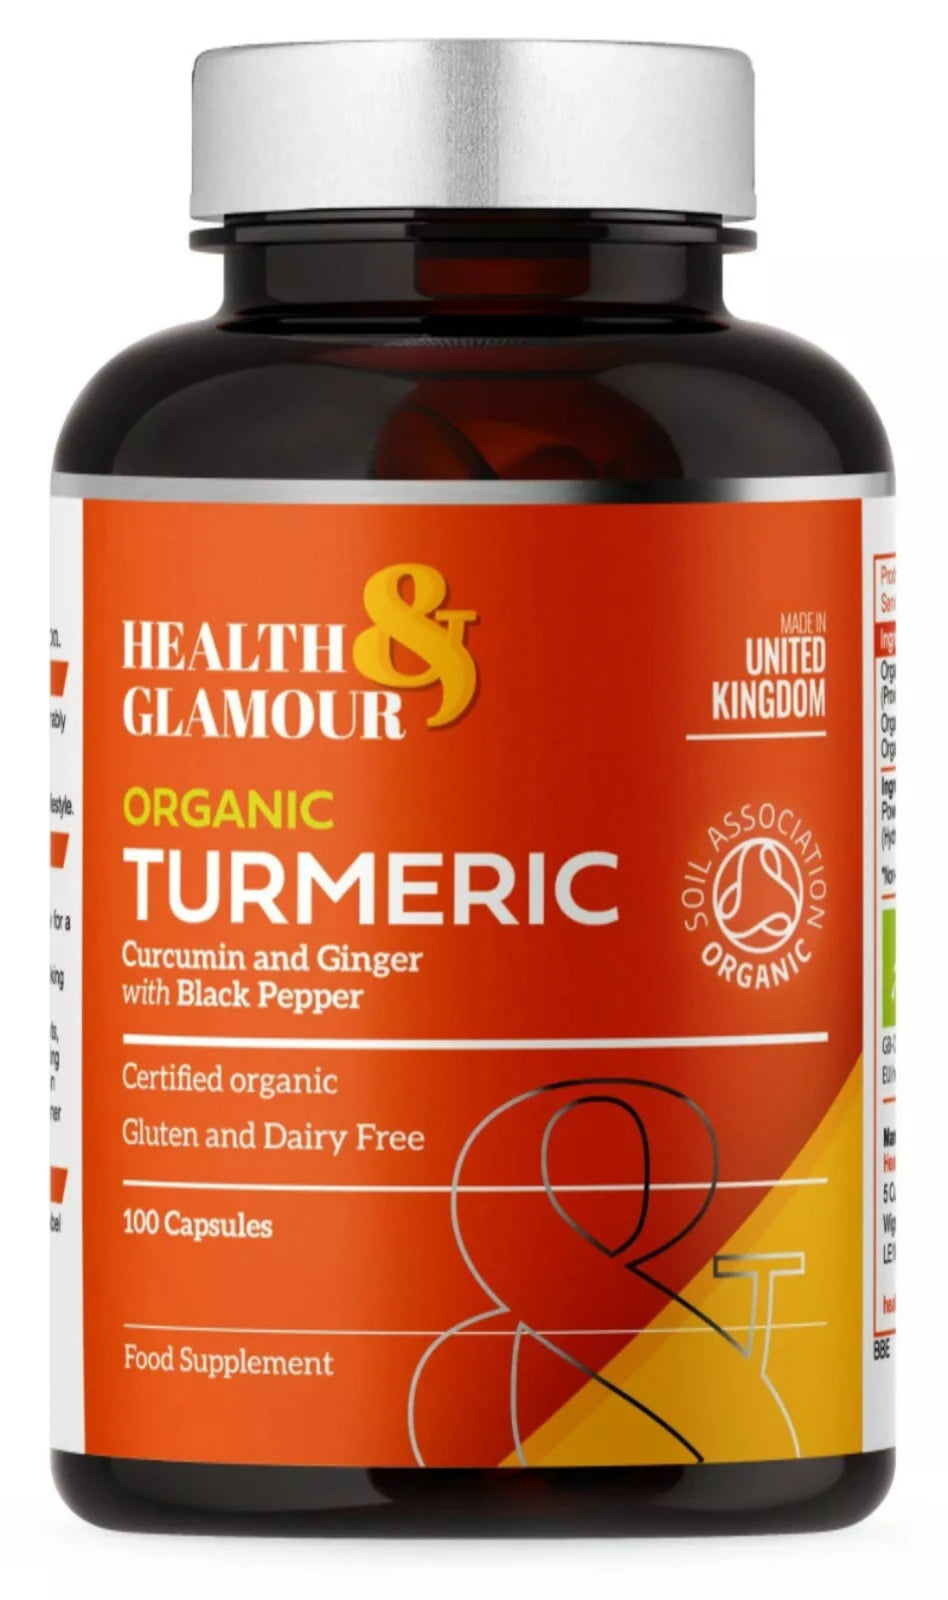 Health & Glamour Organic Turmeric Curcumin and Ginger with Black Pepper 100 Caps